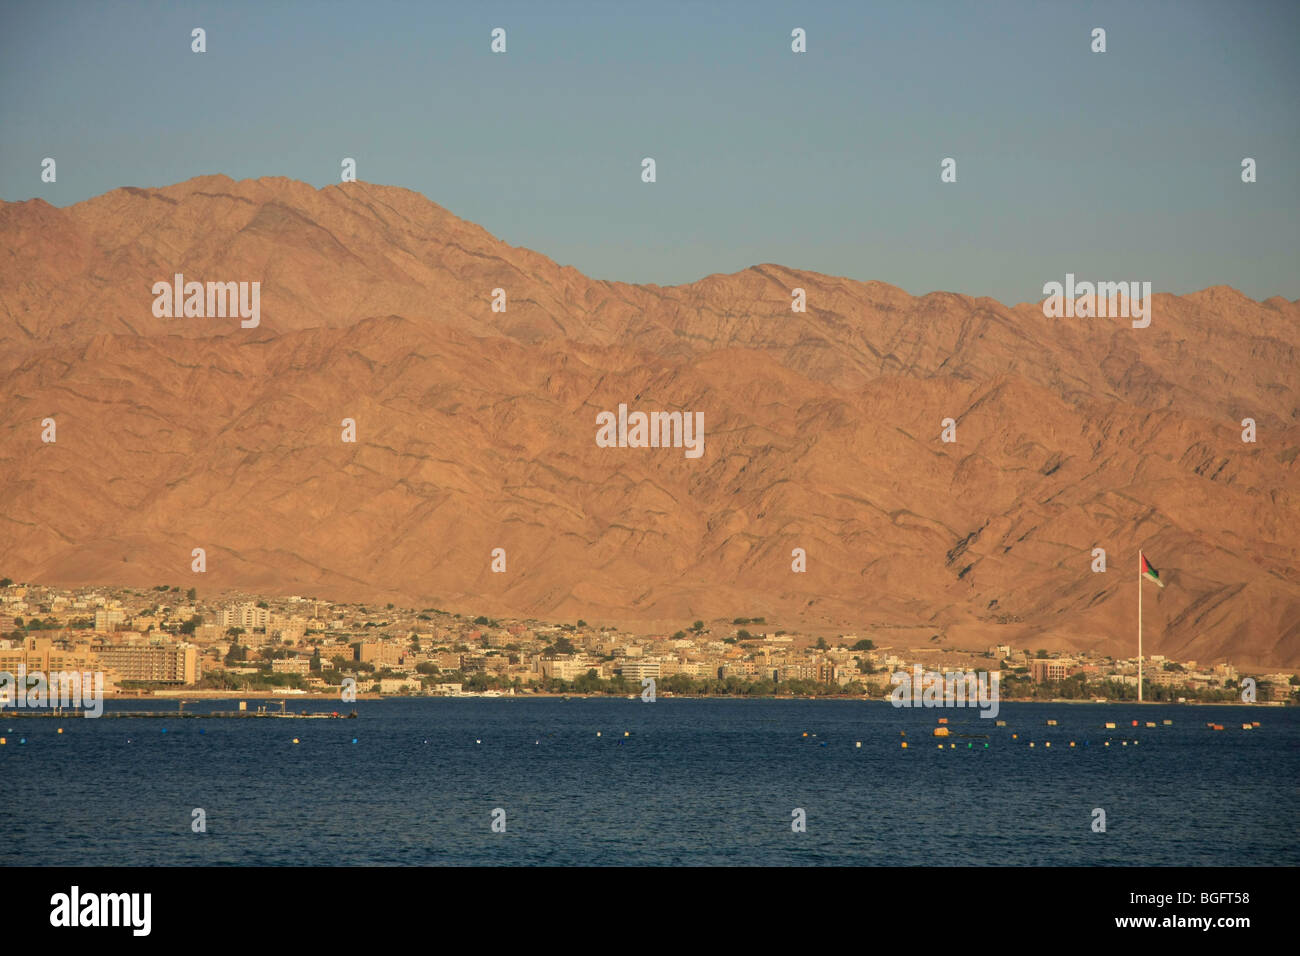 Israel, a view of Aqaba as seen from Eilat Stock Photo